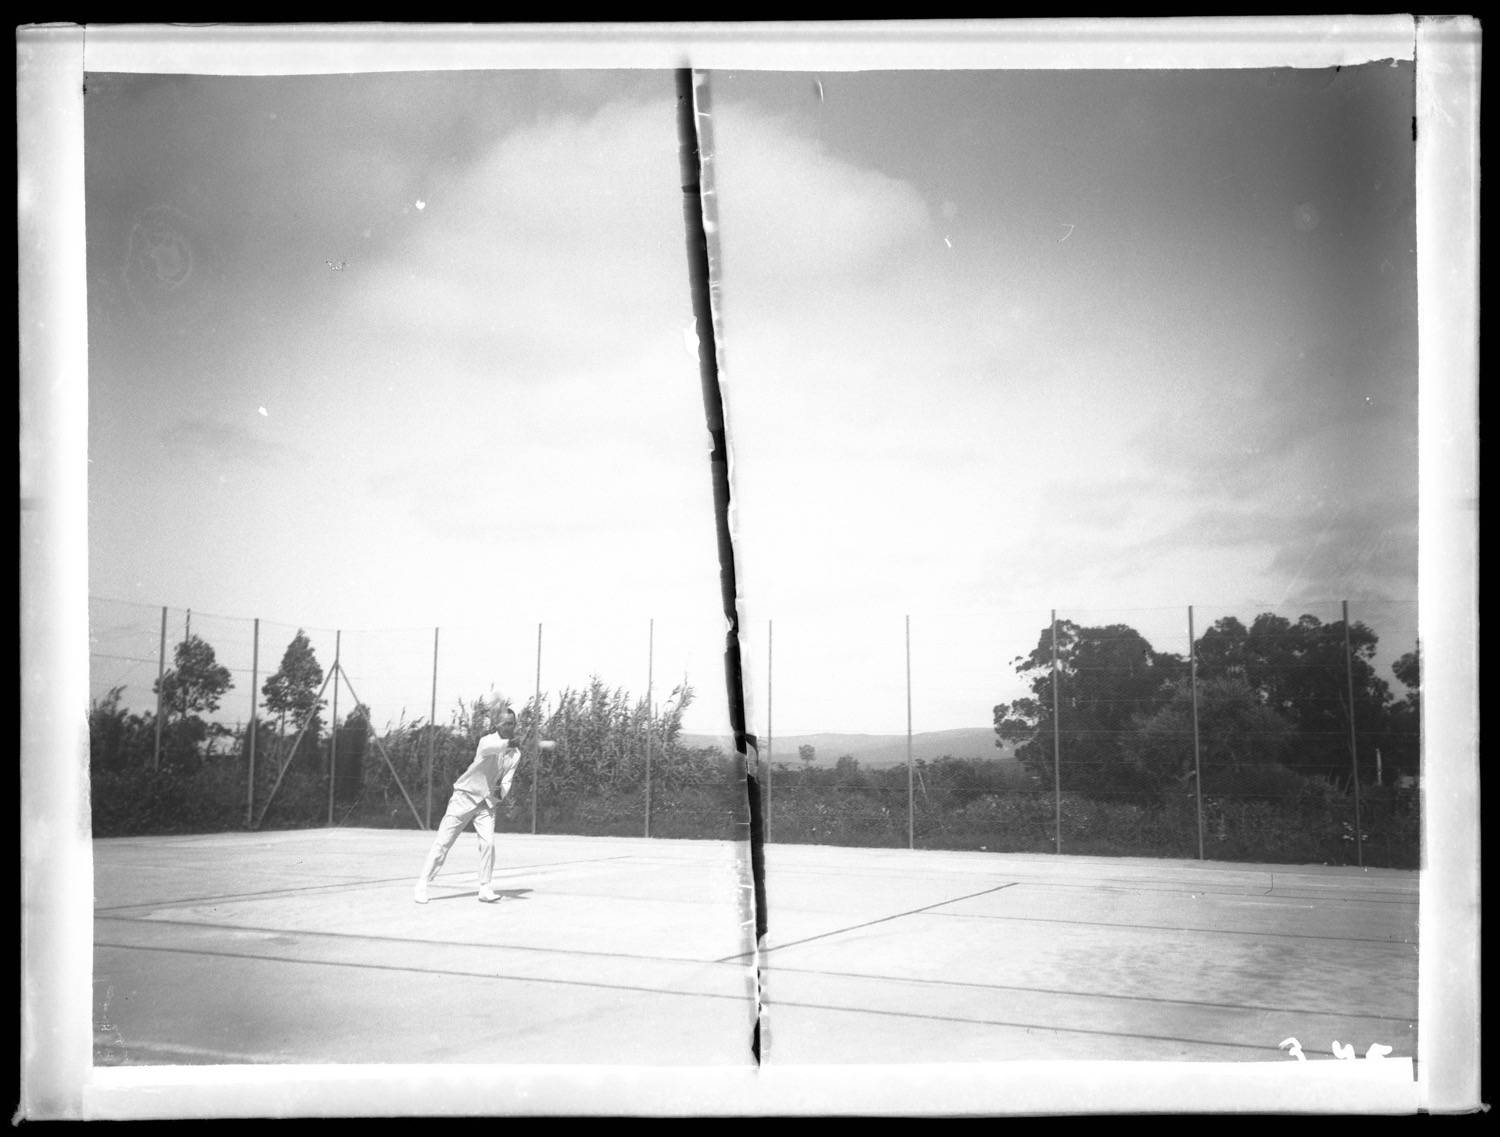 <p>The player strikes the ball in this singles tennis match.</p>